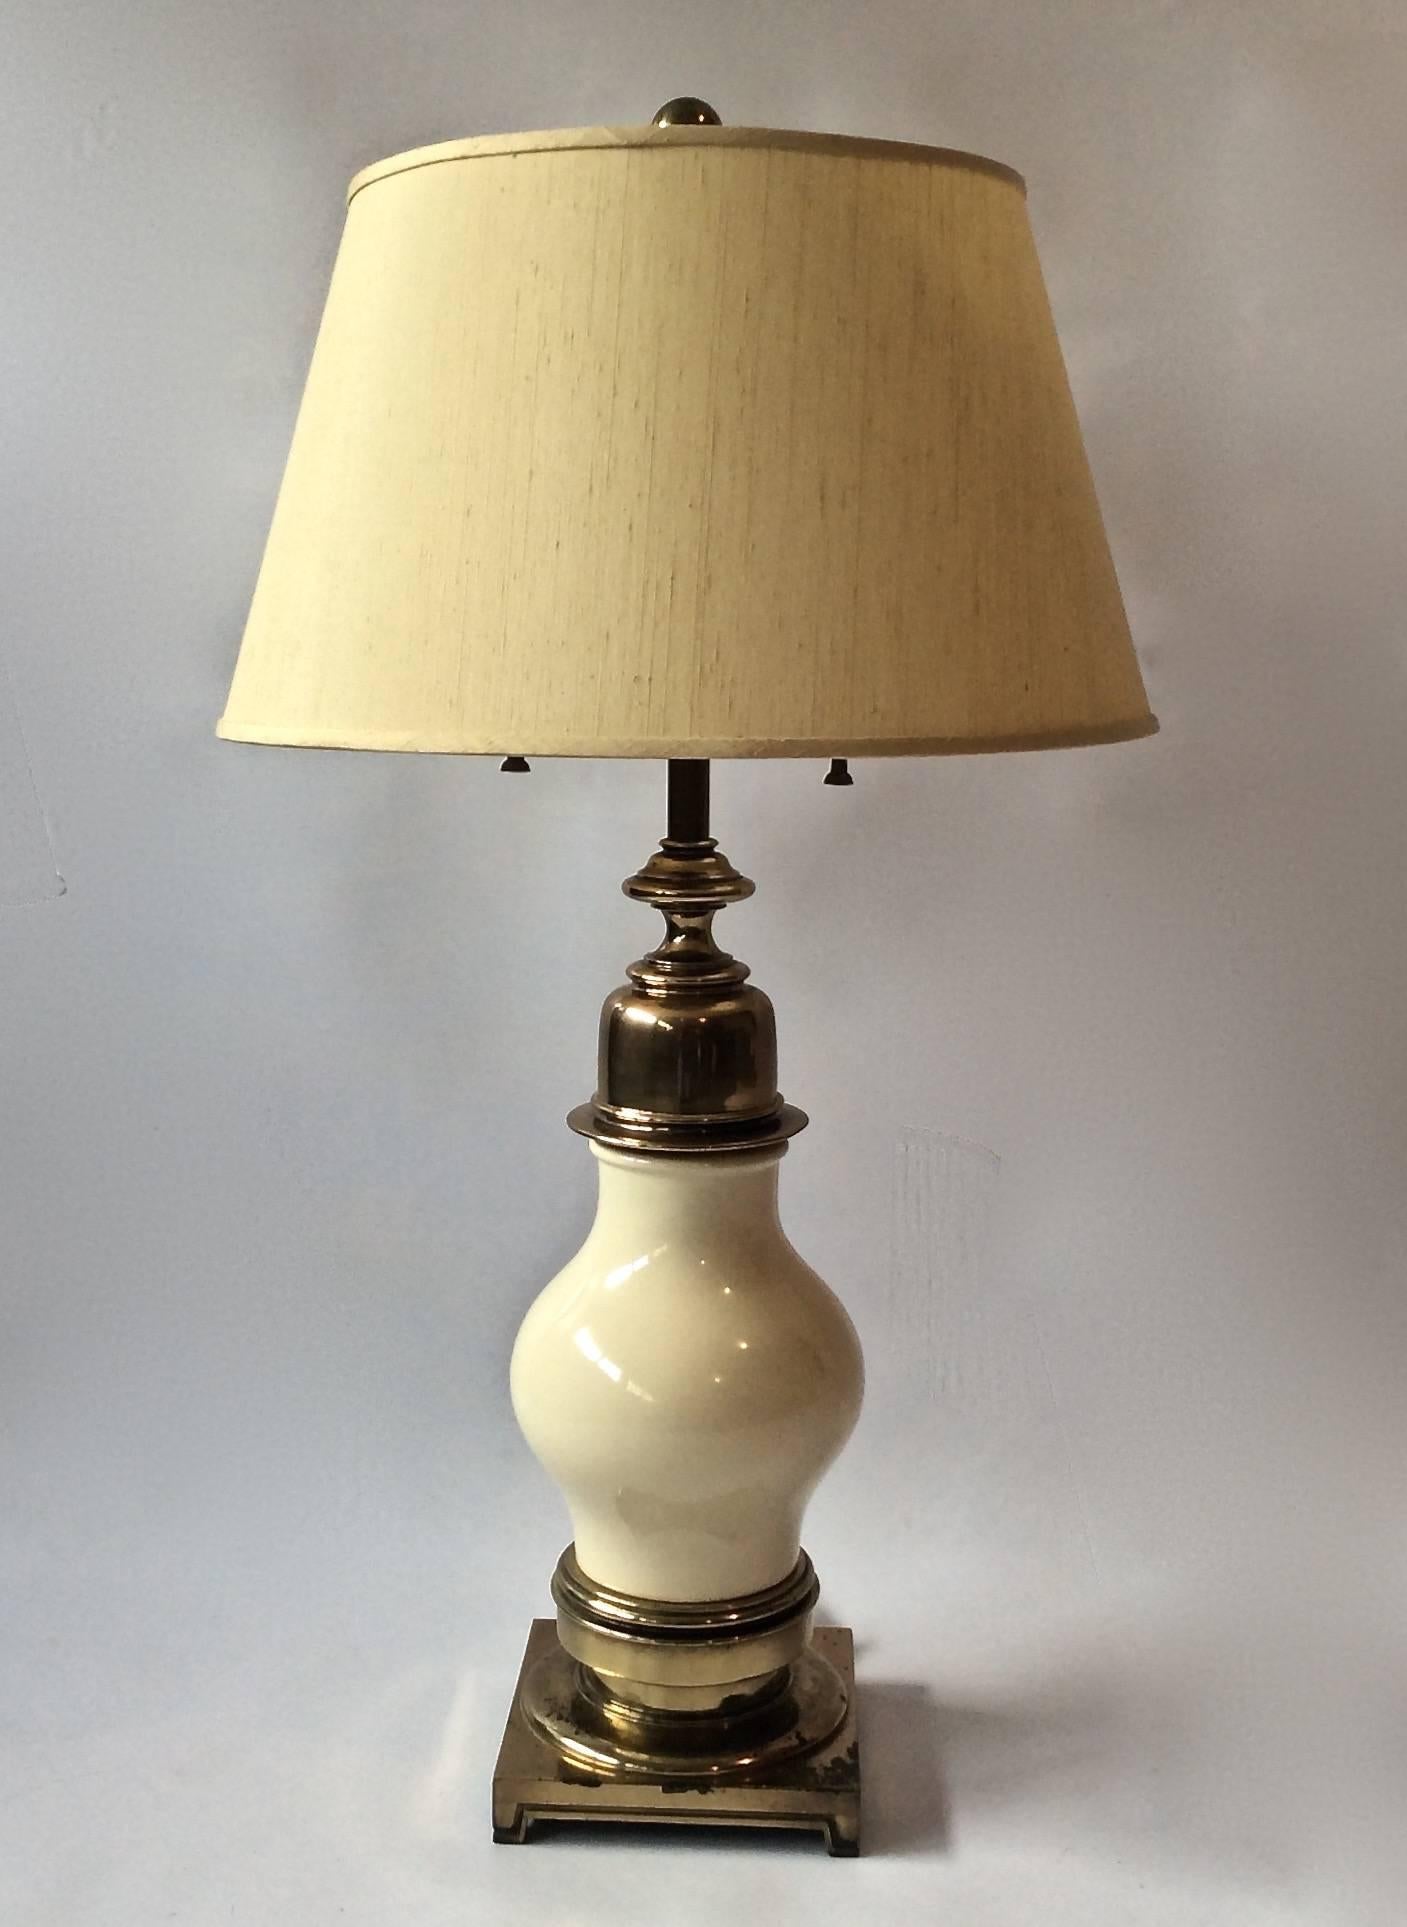 Pair of large and impressive table lamps in ivory ceramic with solid aged brass base and accents by Stiffel Lighting, American, 1950s. Double cluster socket, labeled 